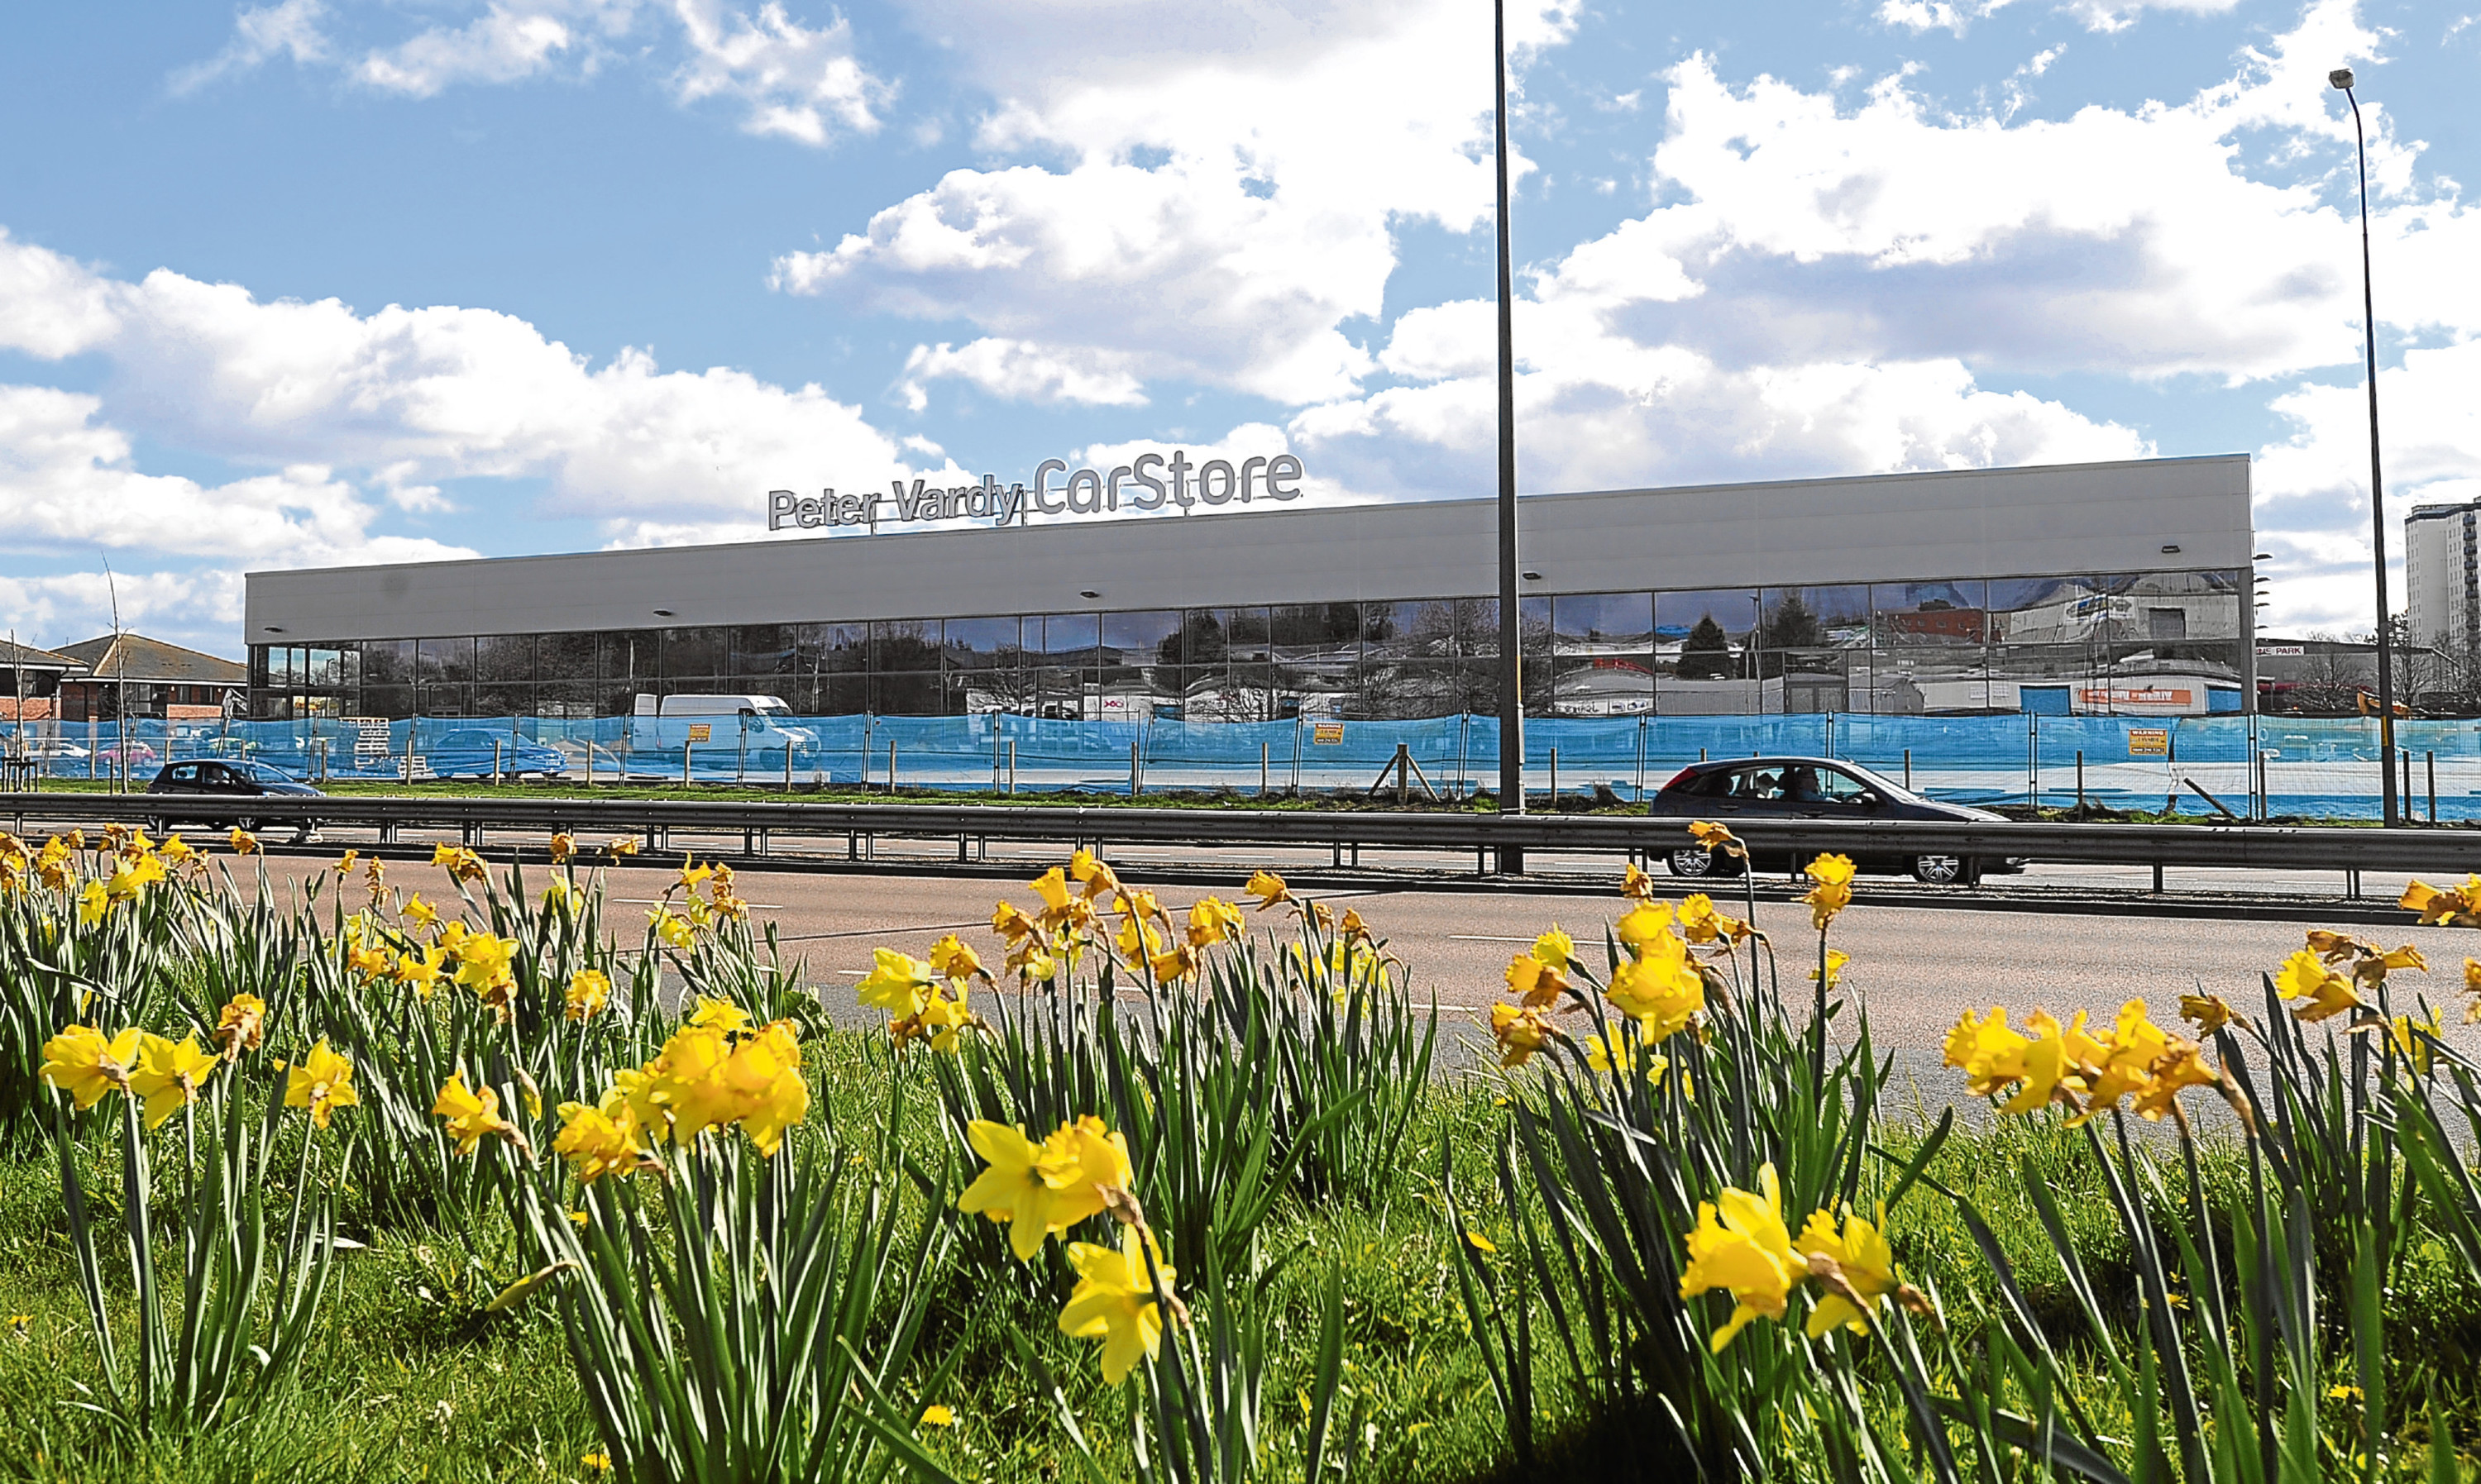 The Peter Vardy premises was initially a CarStore selling new vehicles.